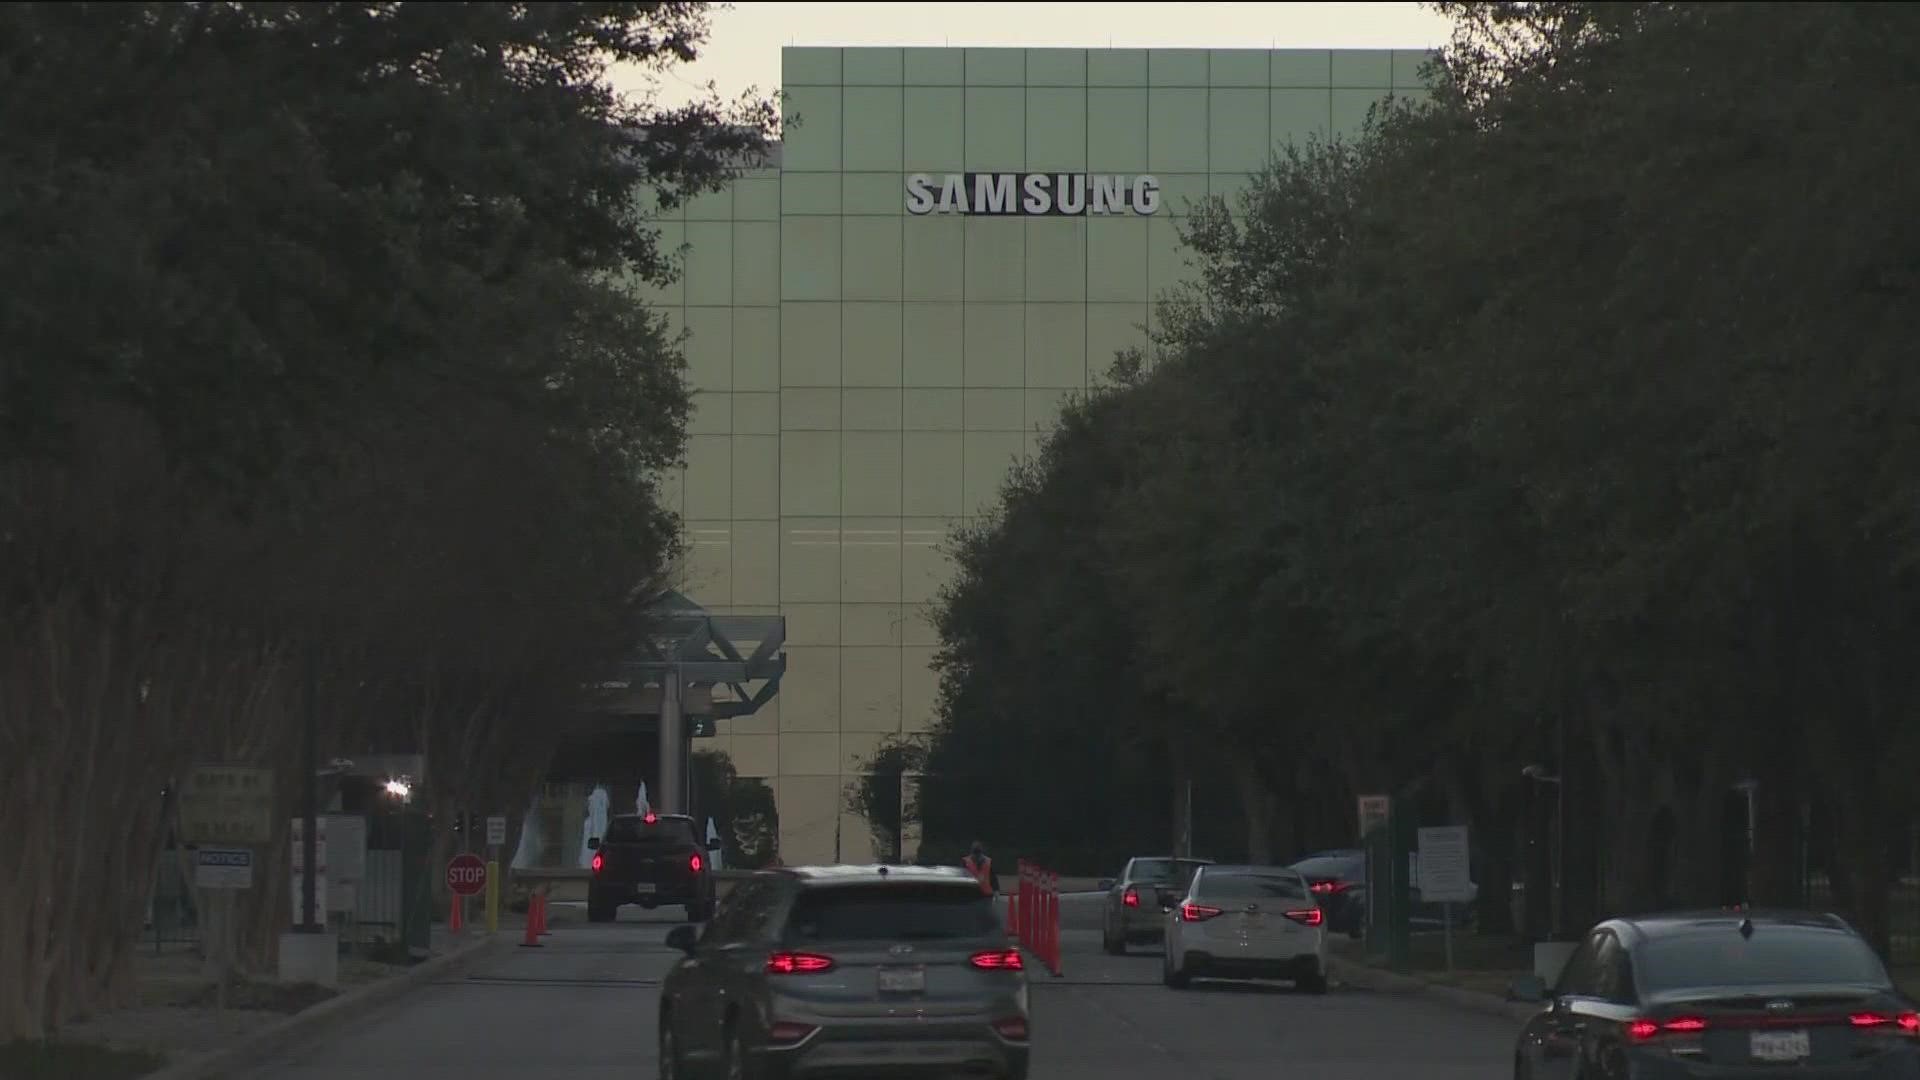 Samsung leaders said about 763,000 gallons of diluted acidic wastewater spilled into a tributary of Harris Branch Creek.